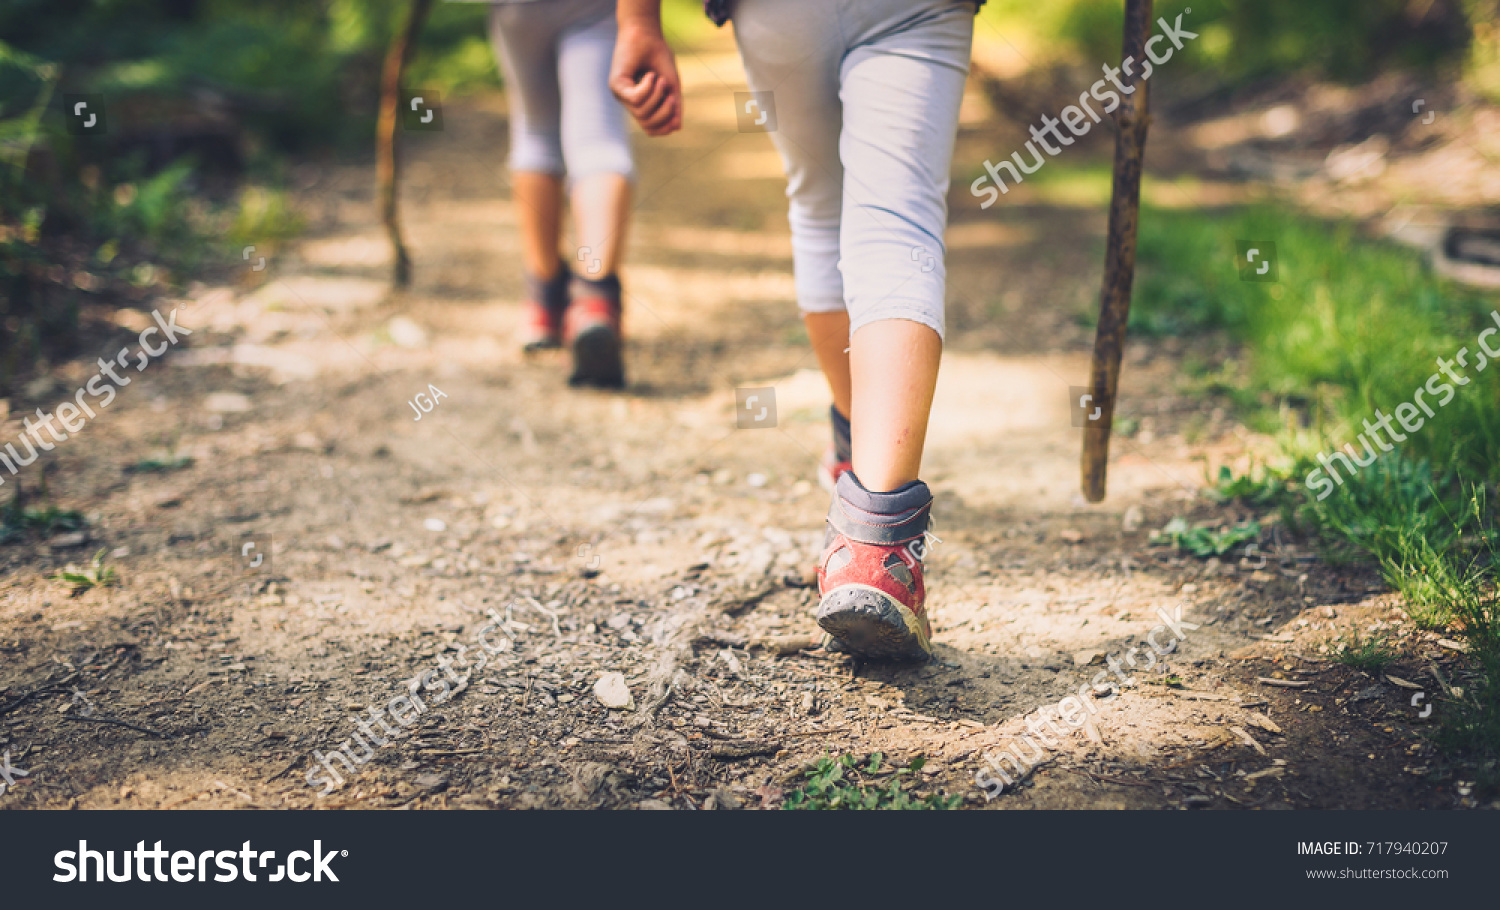 Children hiking in mountains or forest with sport hiking shoes. Girls or boys are walking trough forest path wearing mountain boots and walking sticks. Frog perspective with focus on the shoes. #717940207